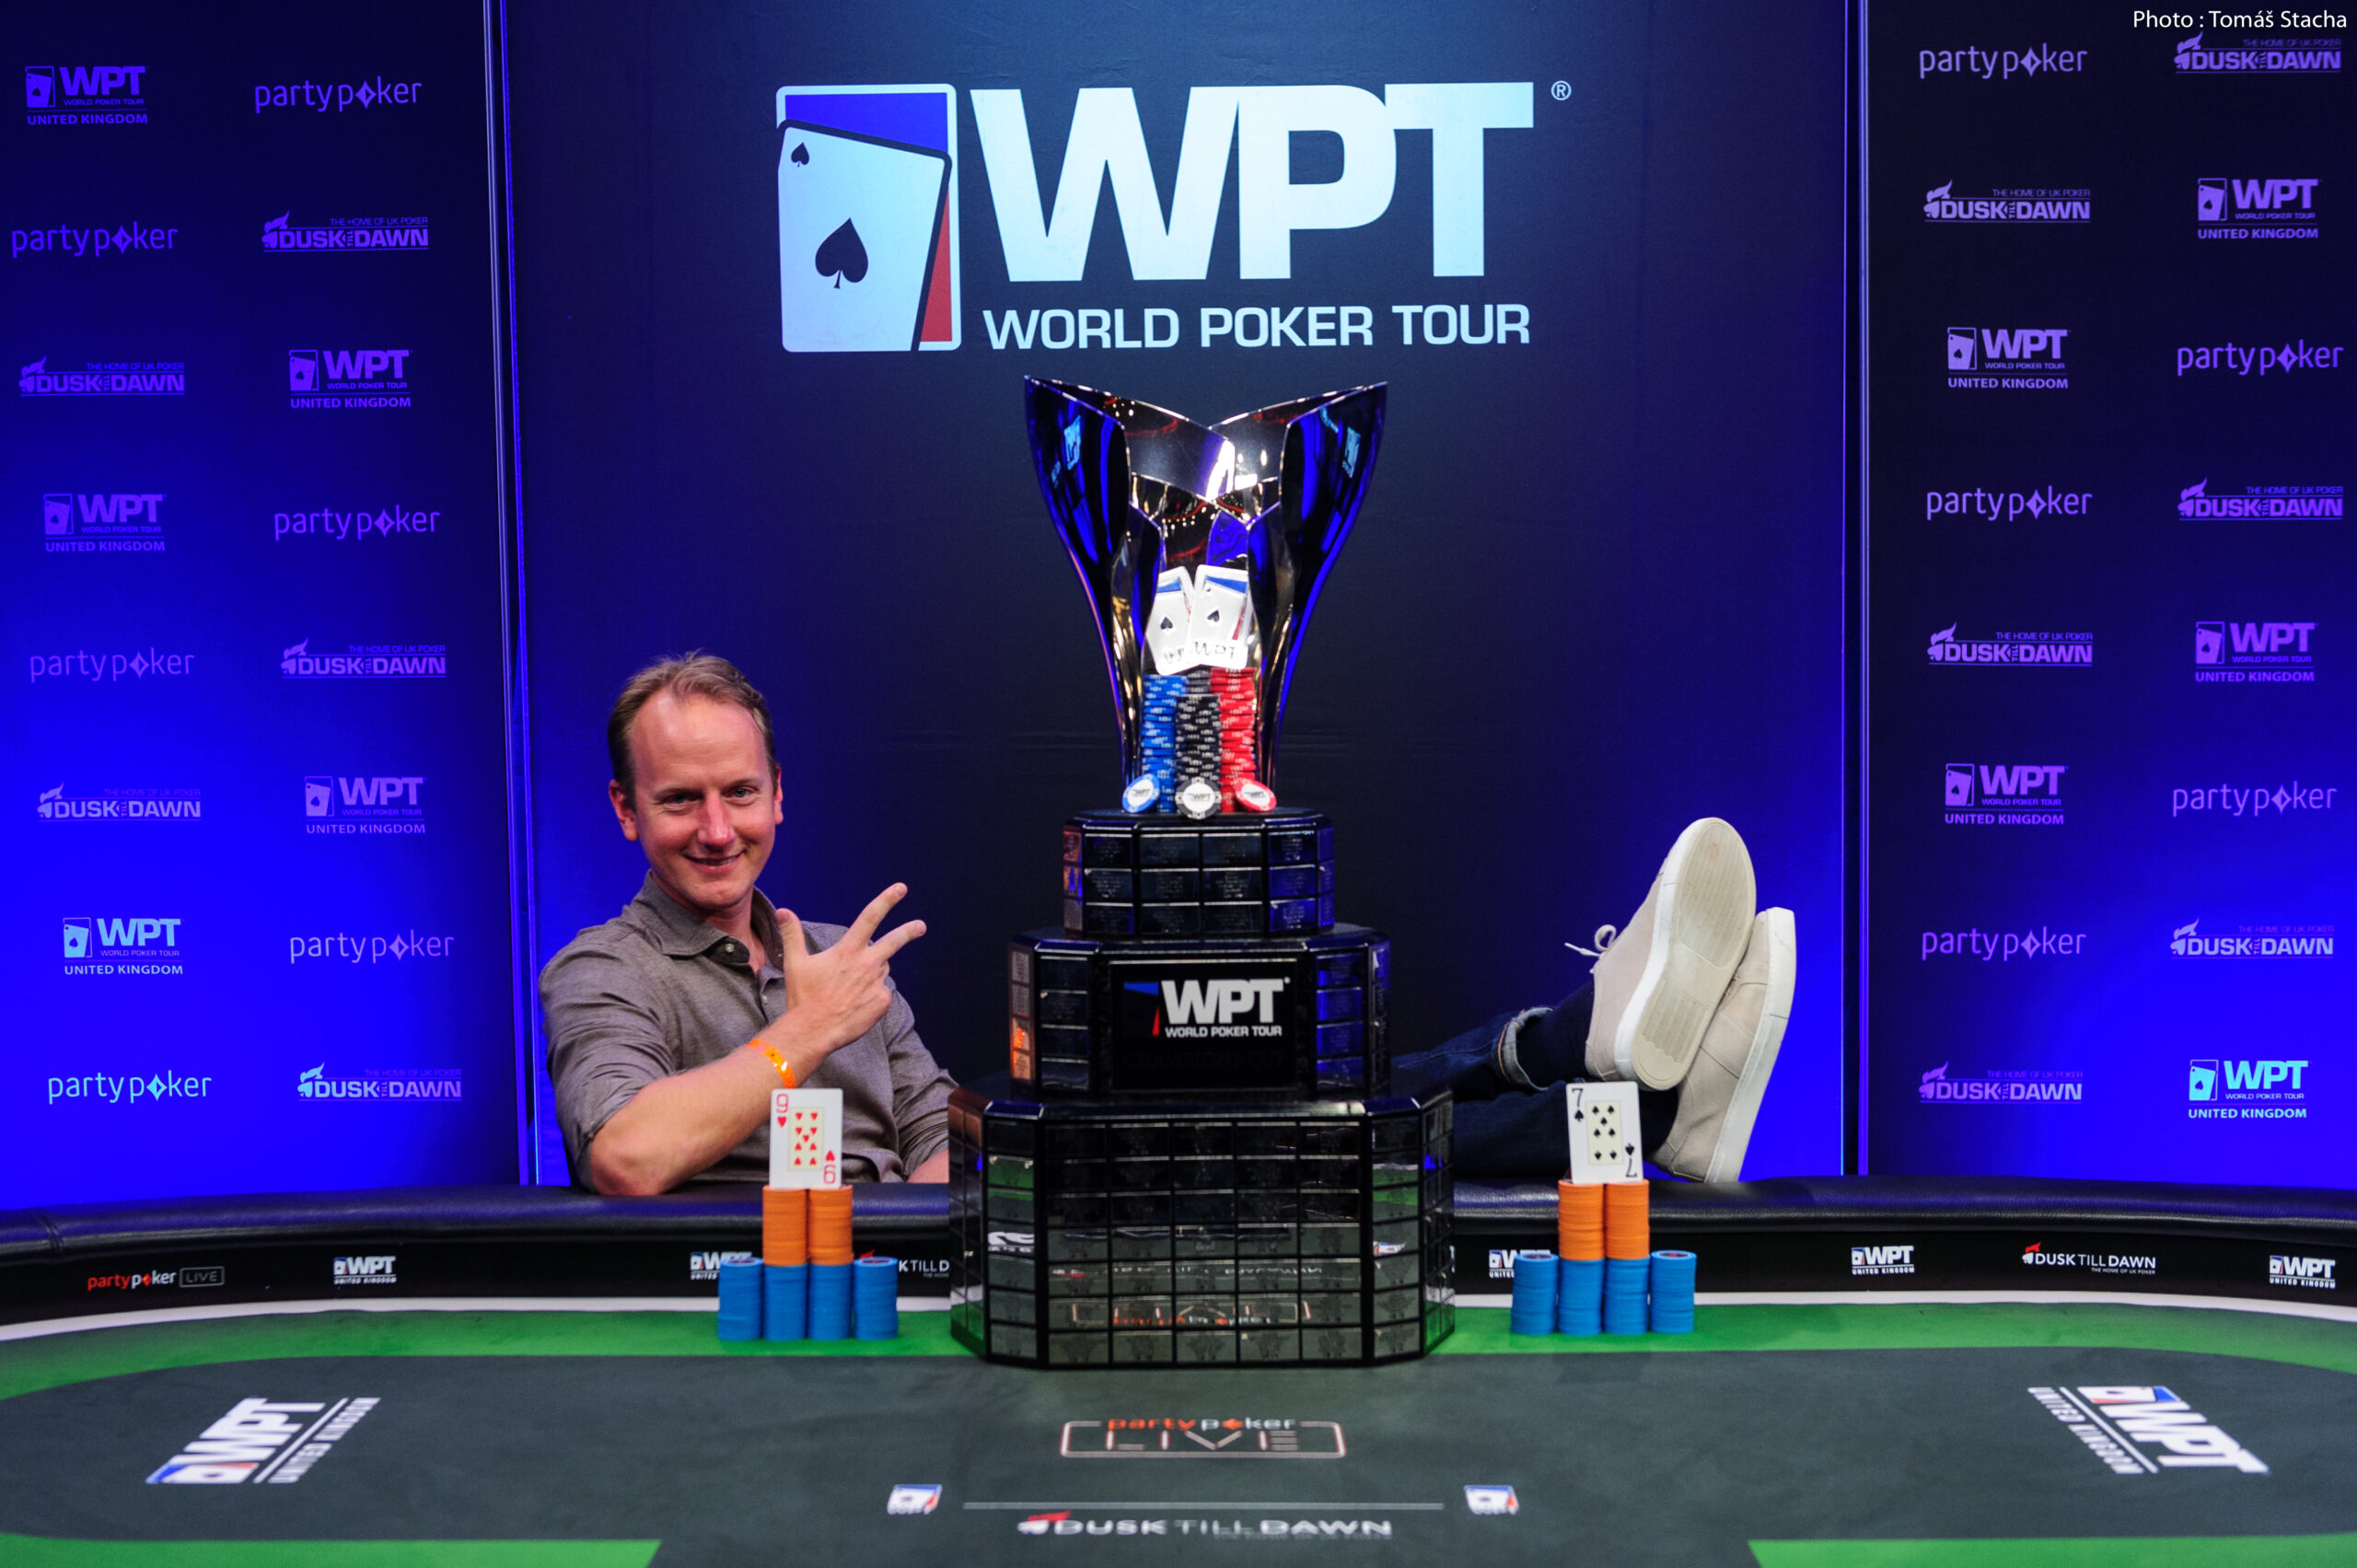 Simon Brandstrom Does it Again After Winning WPT UK Main Event